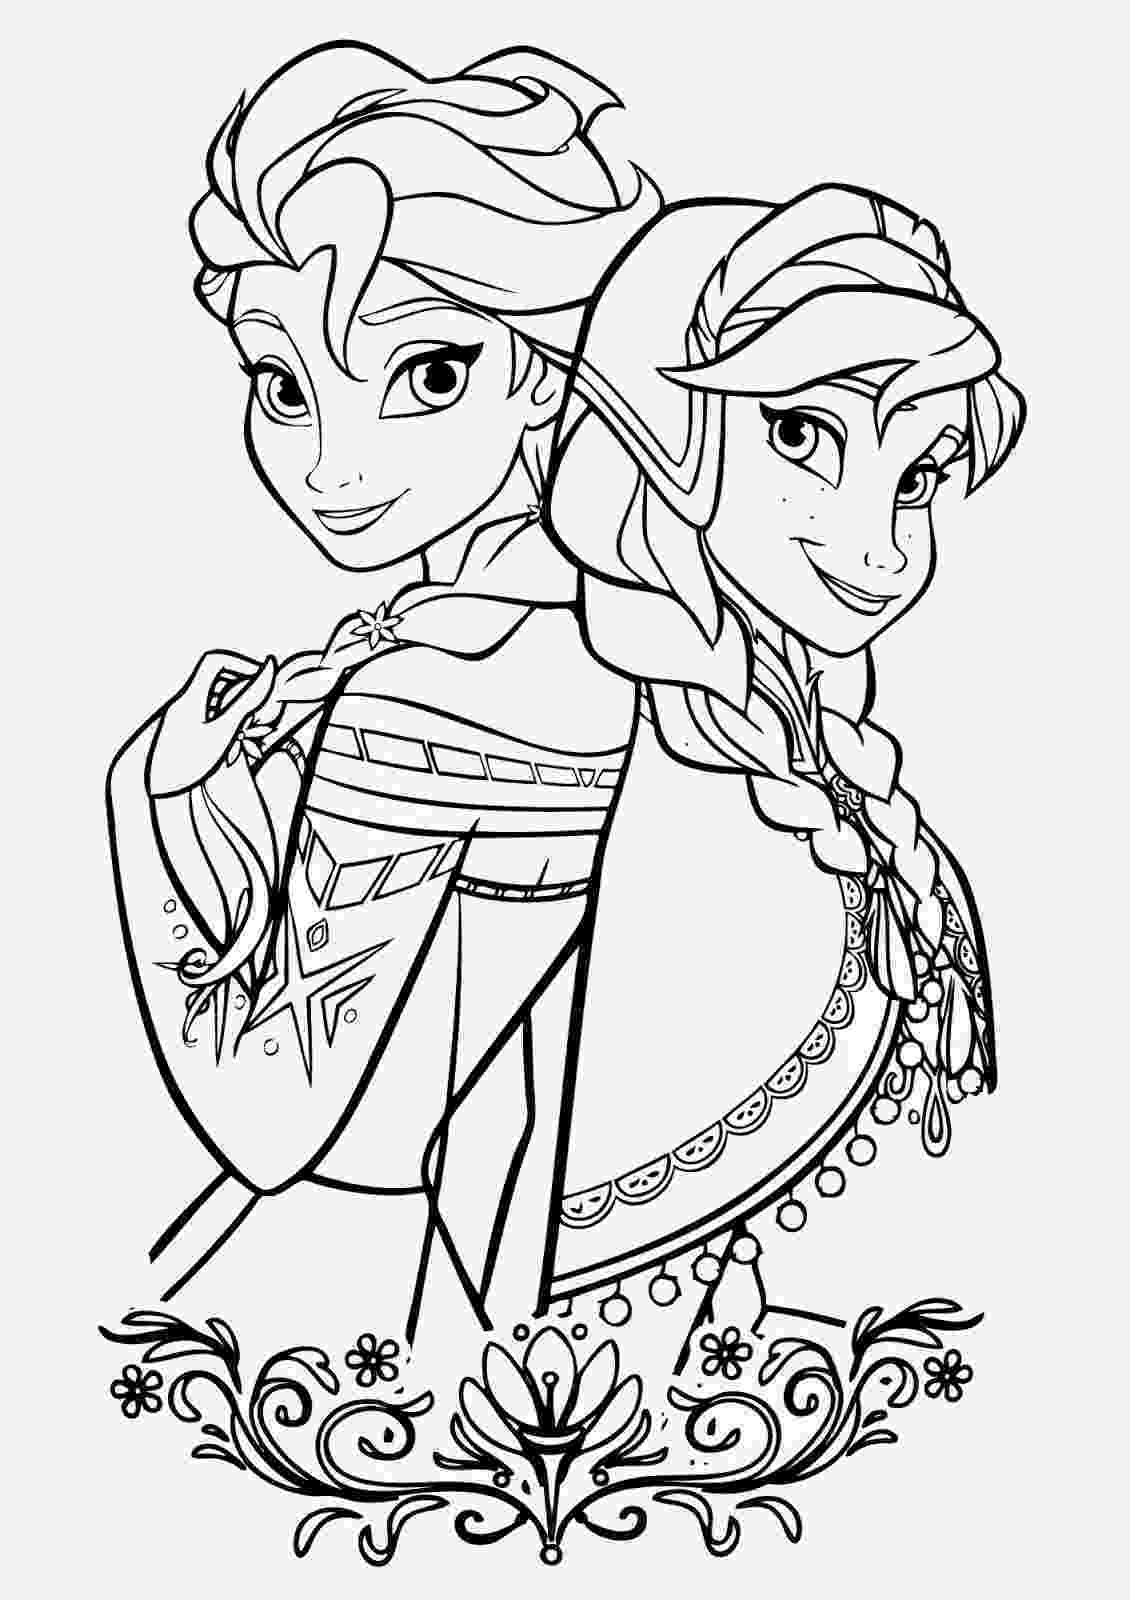 anna and elsa pictures to color frozen elsa and anna coloring pages getcoloringpagescom pictures and to anna elsa color 